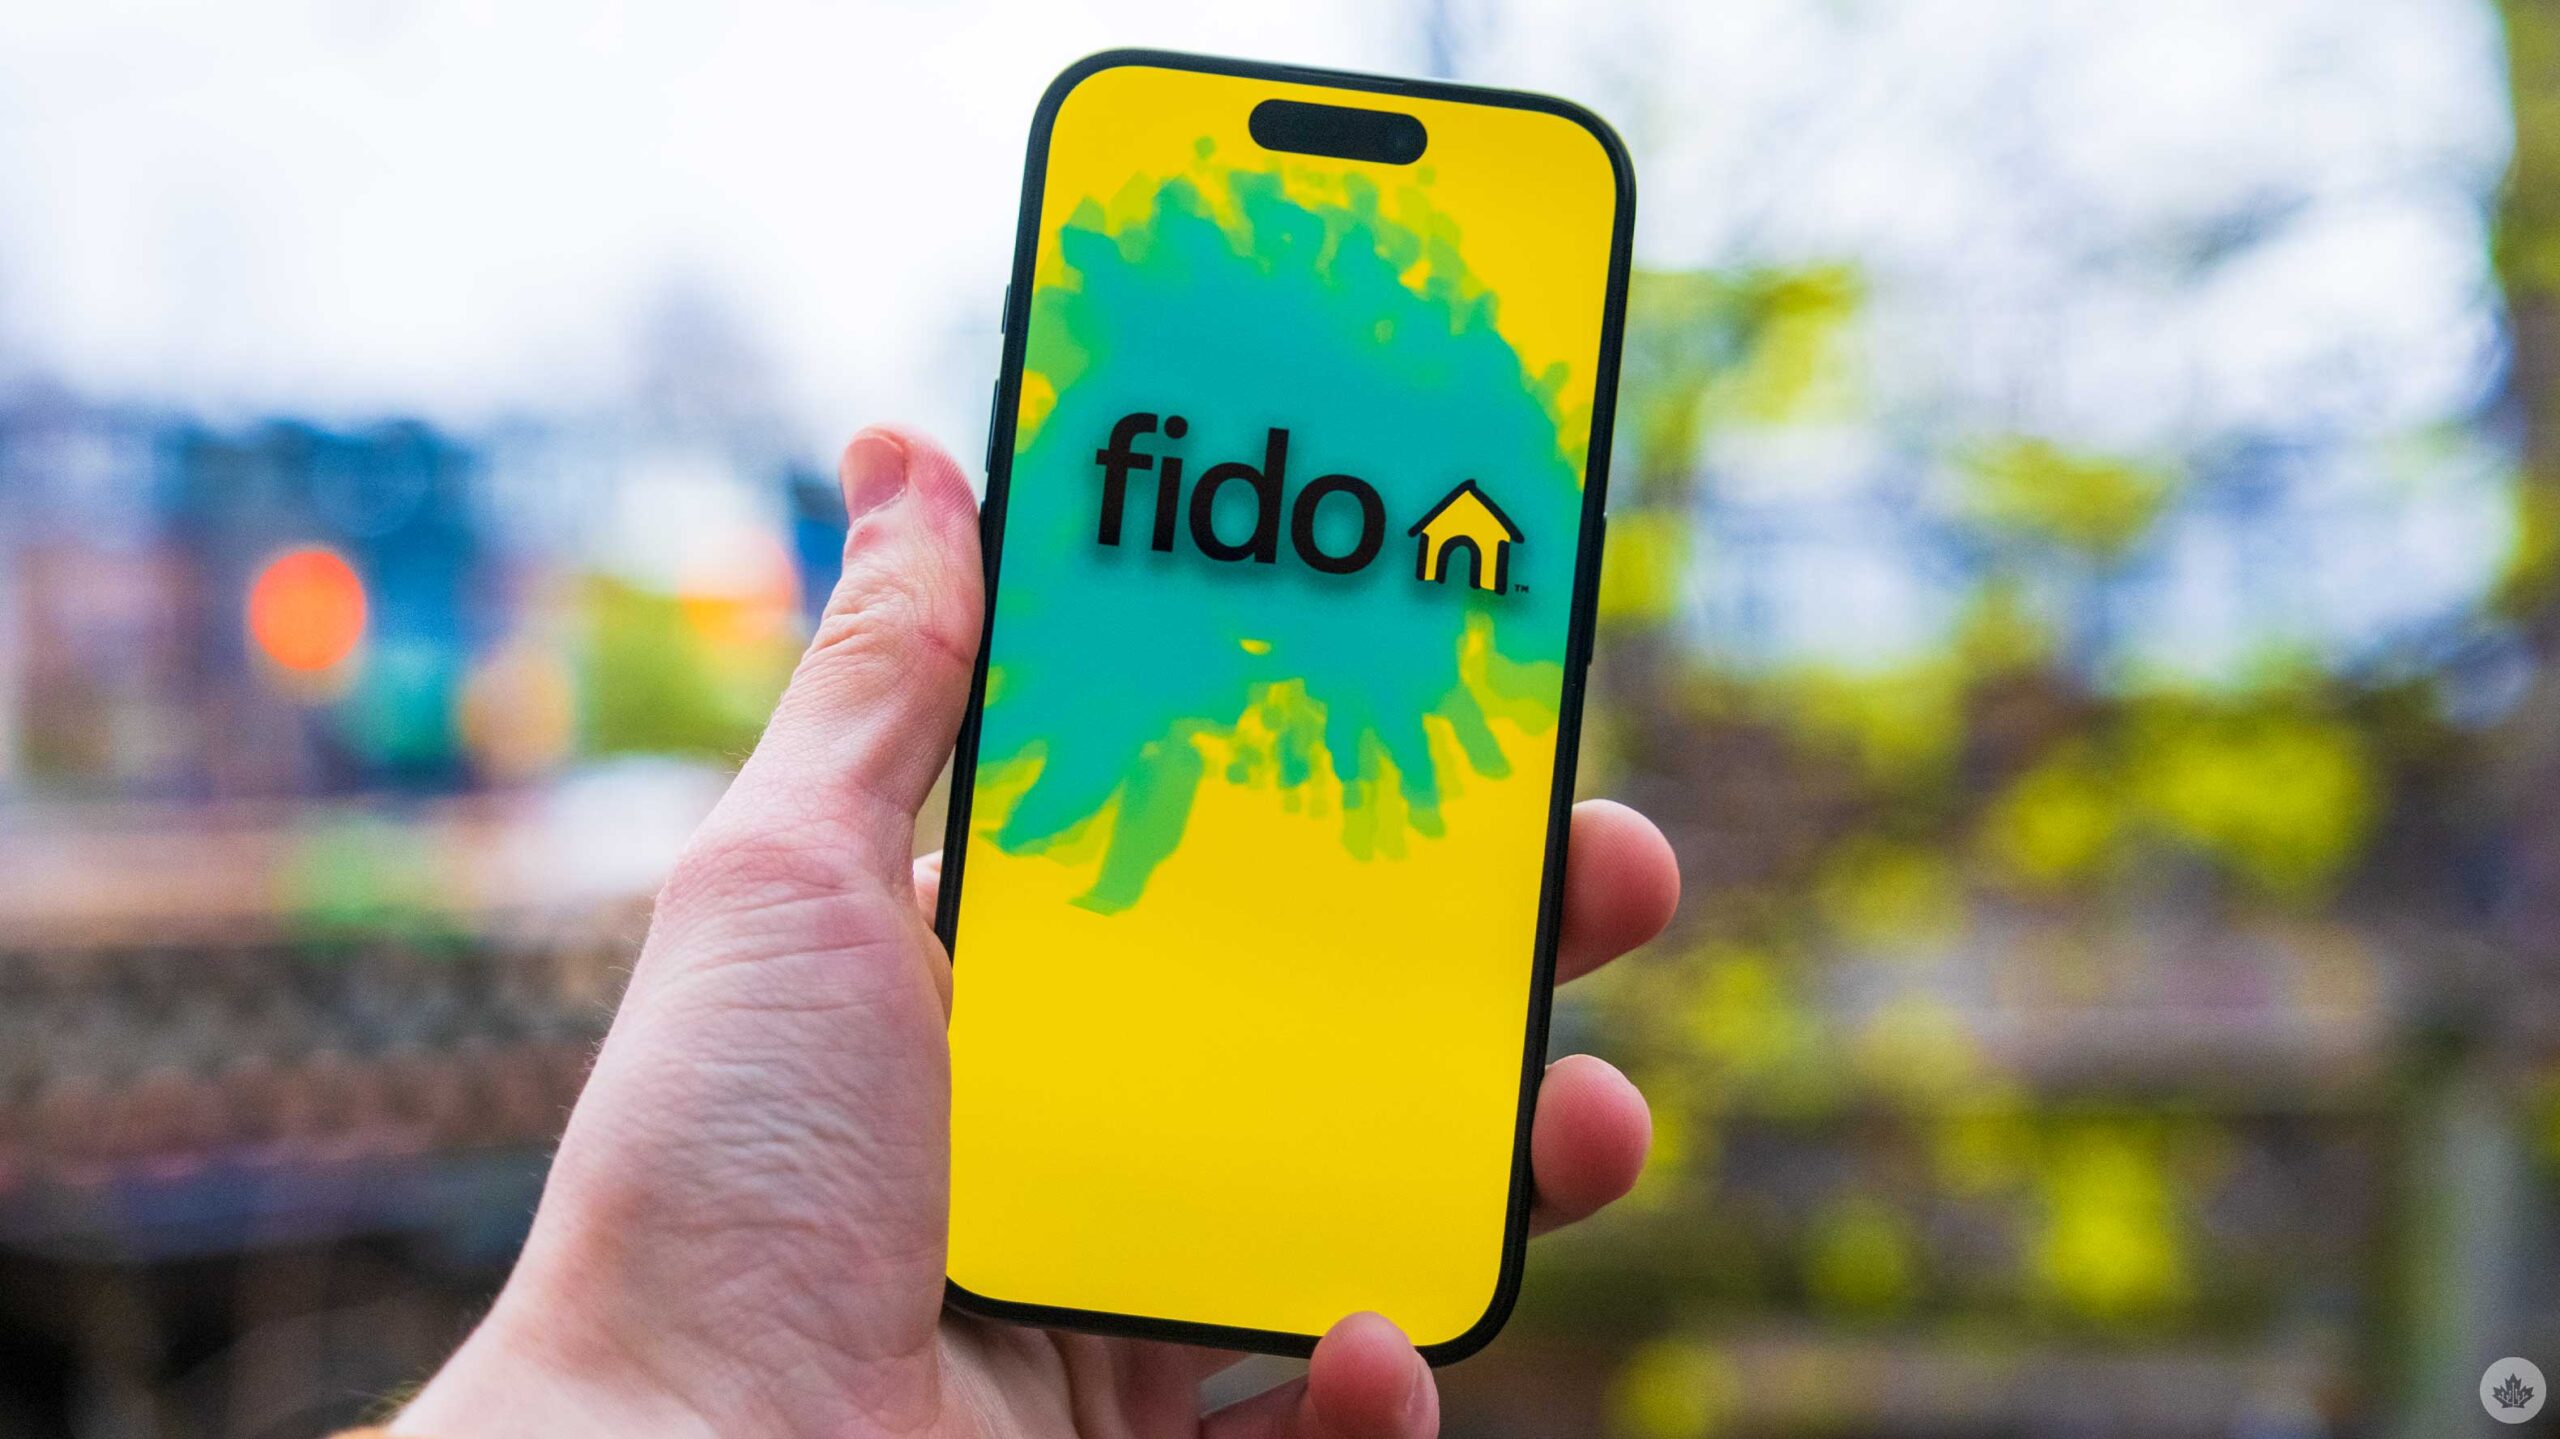 Fido offering $40/75GB 4G Canada-U.S. plan only in Quebec